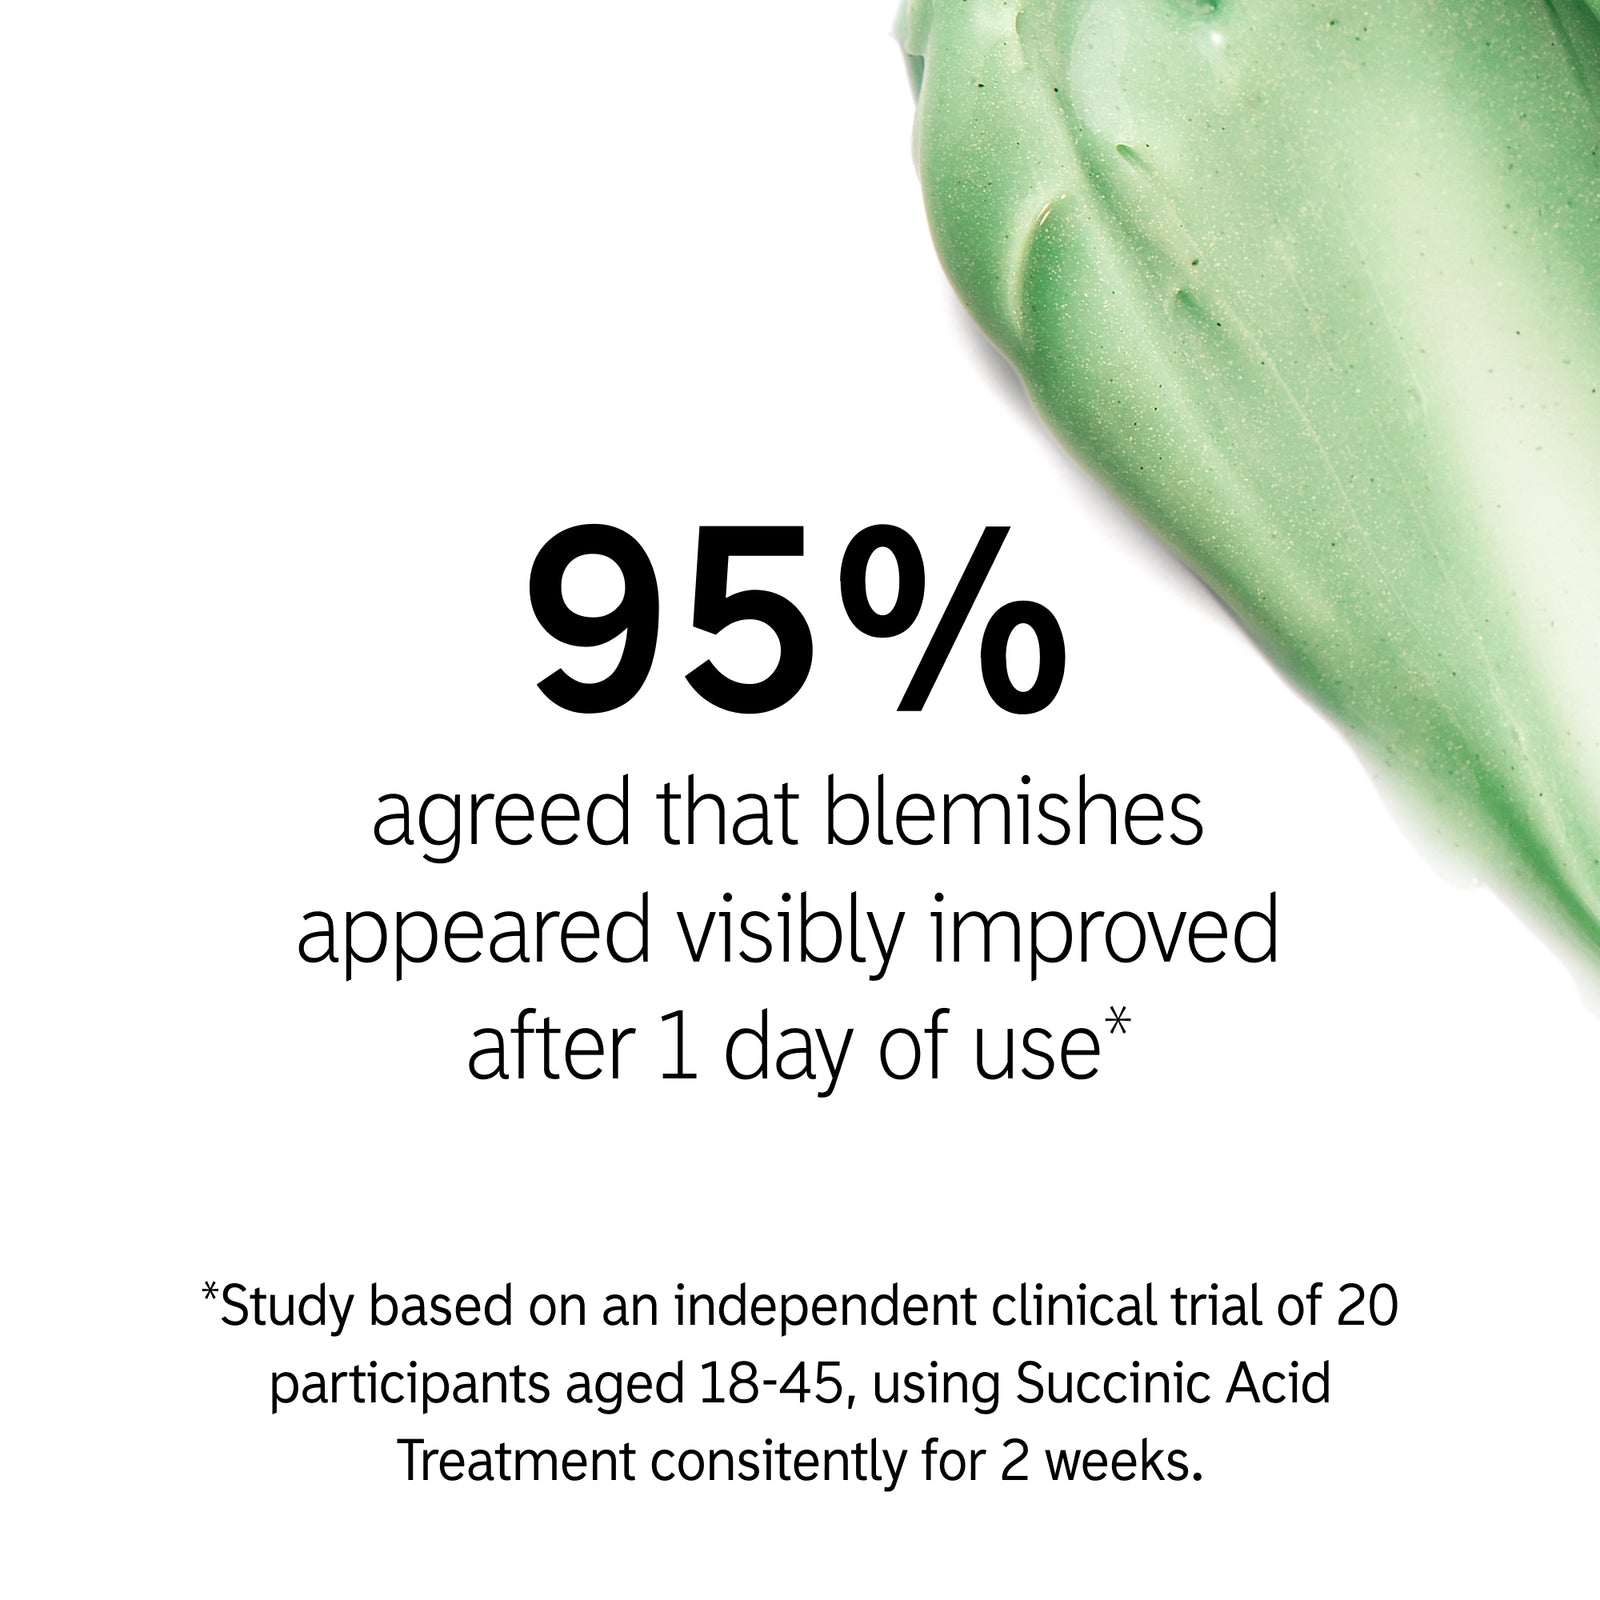 Key claim from 2 week clinical trial of using Succinic Acid Treatment